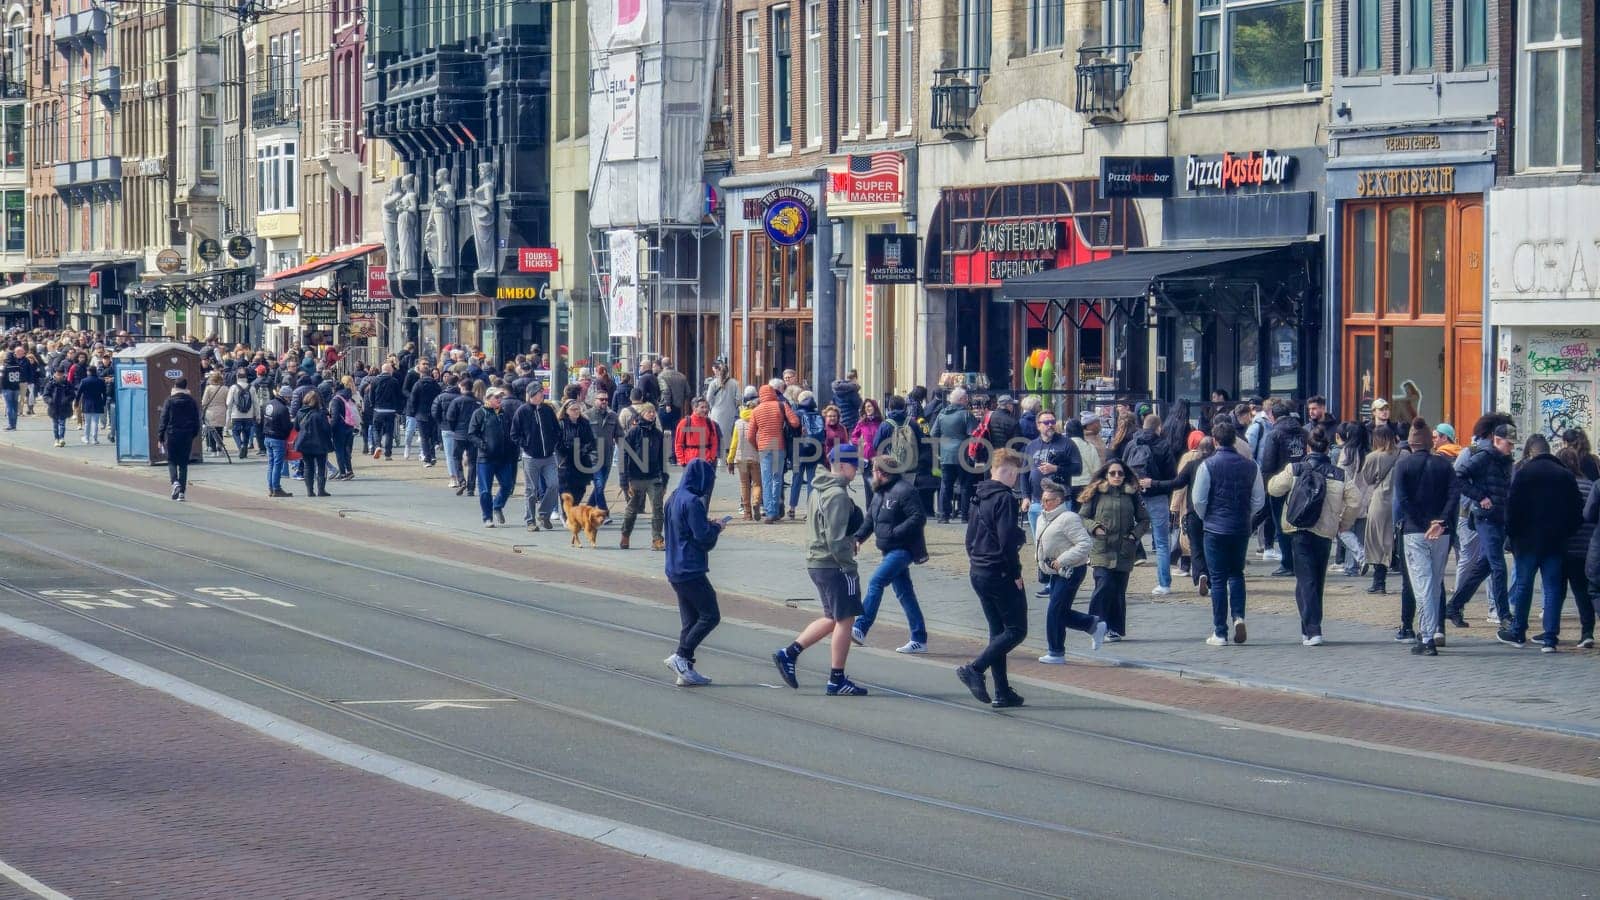 A diverse crowd of people walks briskly down a bustling city street lined with towering buildings, their energy and movement creating a vibrant atmosphere by fokkebok